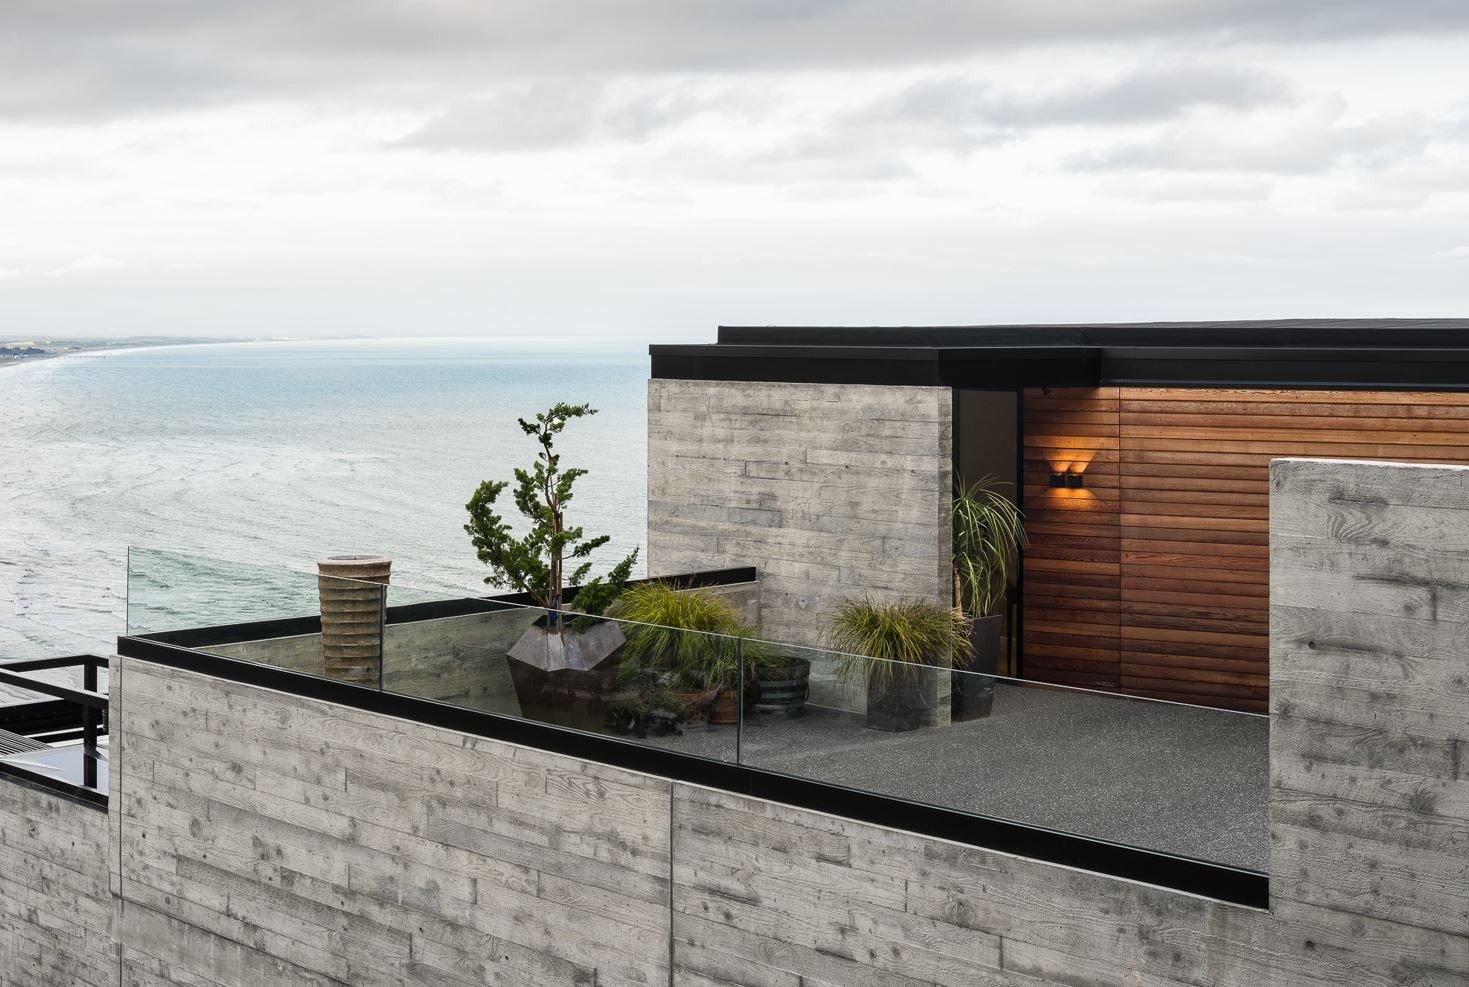 Stone building featuring an open rooftop deck with sweeping ocean views